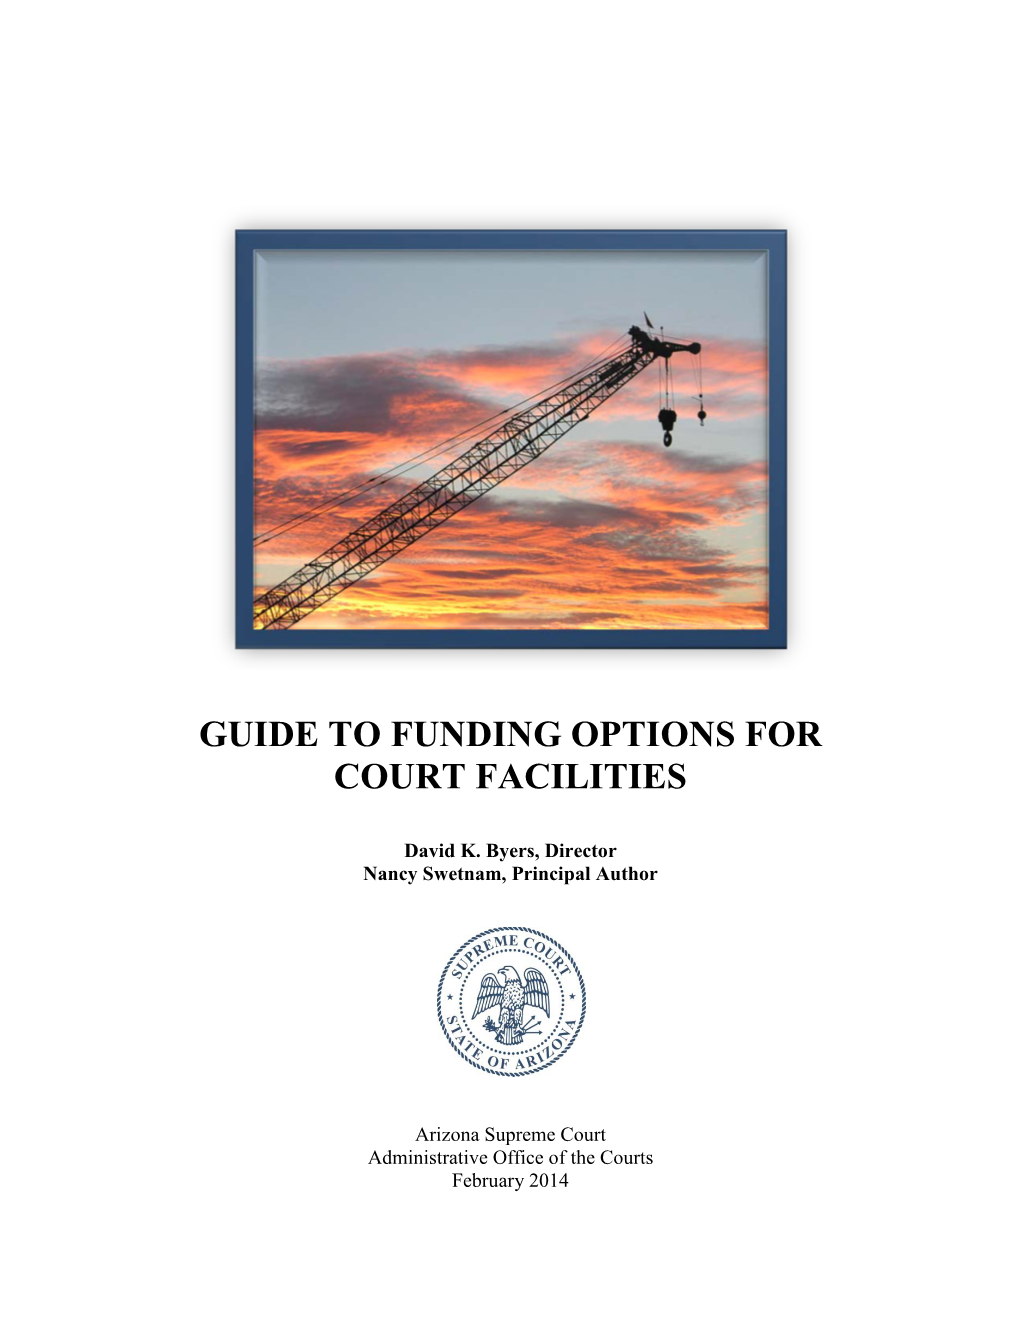 Guide to Funding Options for Court Facilities